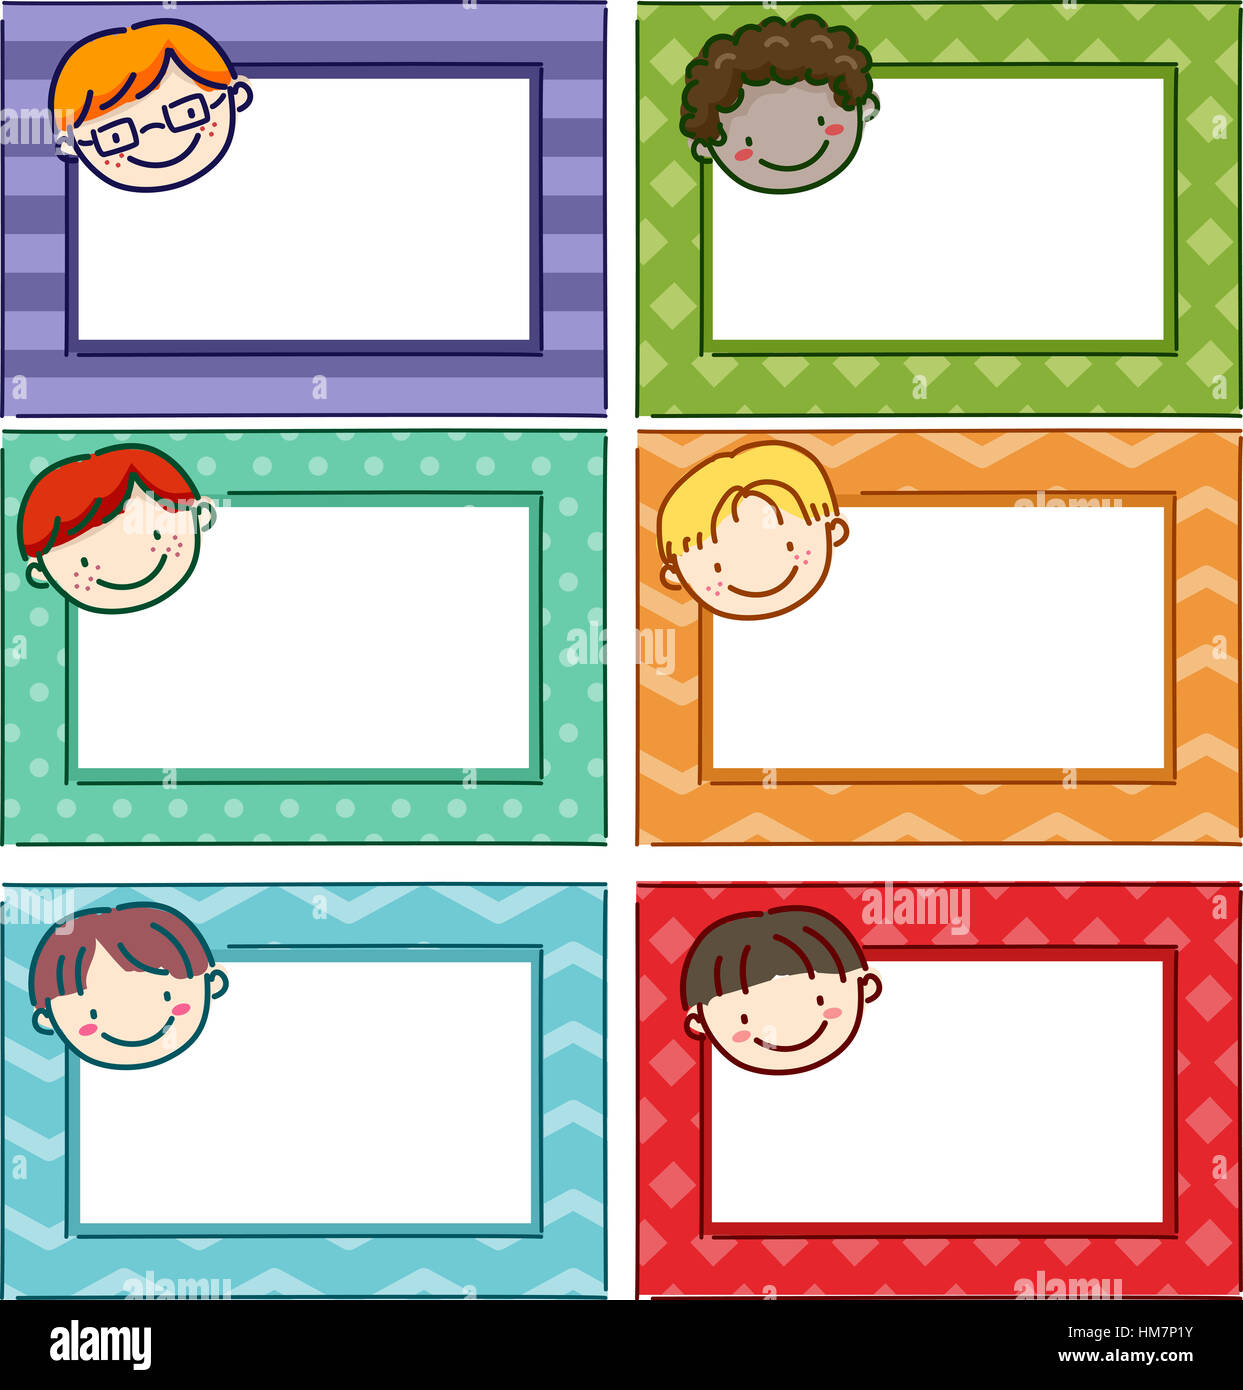 Illustration Featuring Printable Name Tags for Boys Stock Photo - Alamy